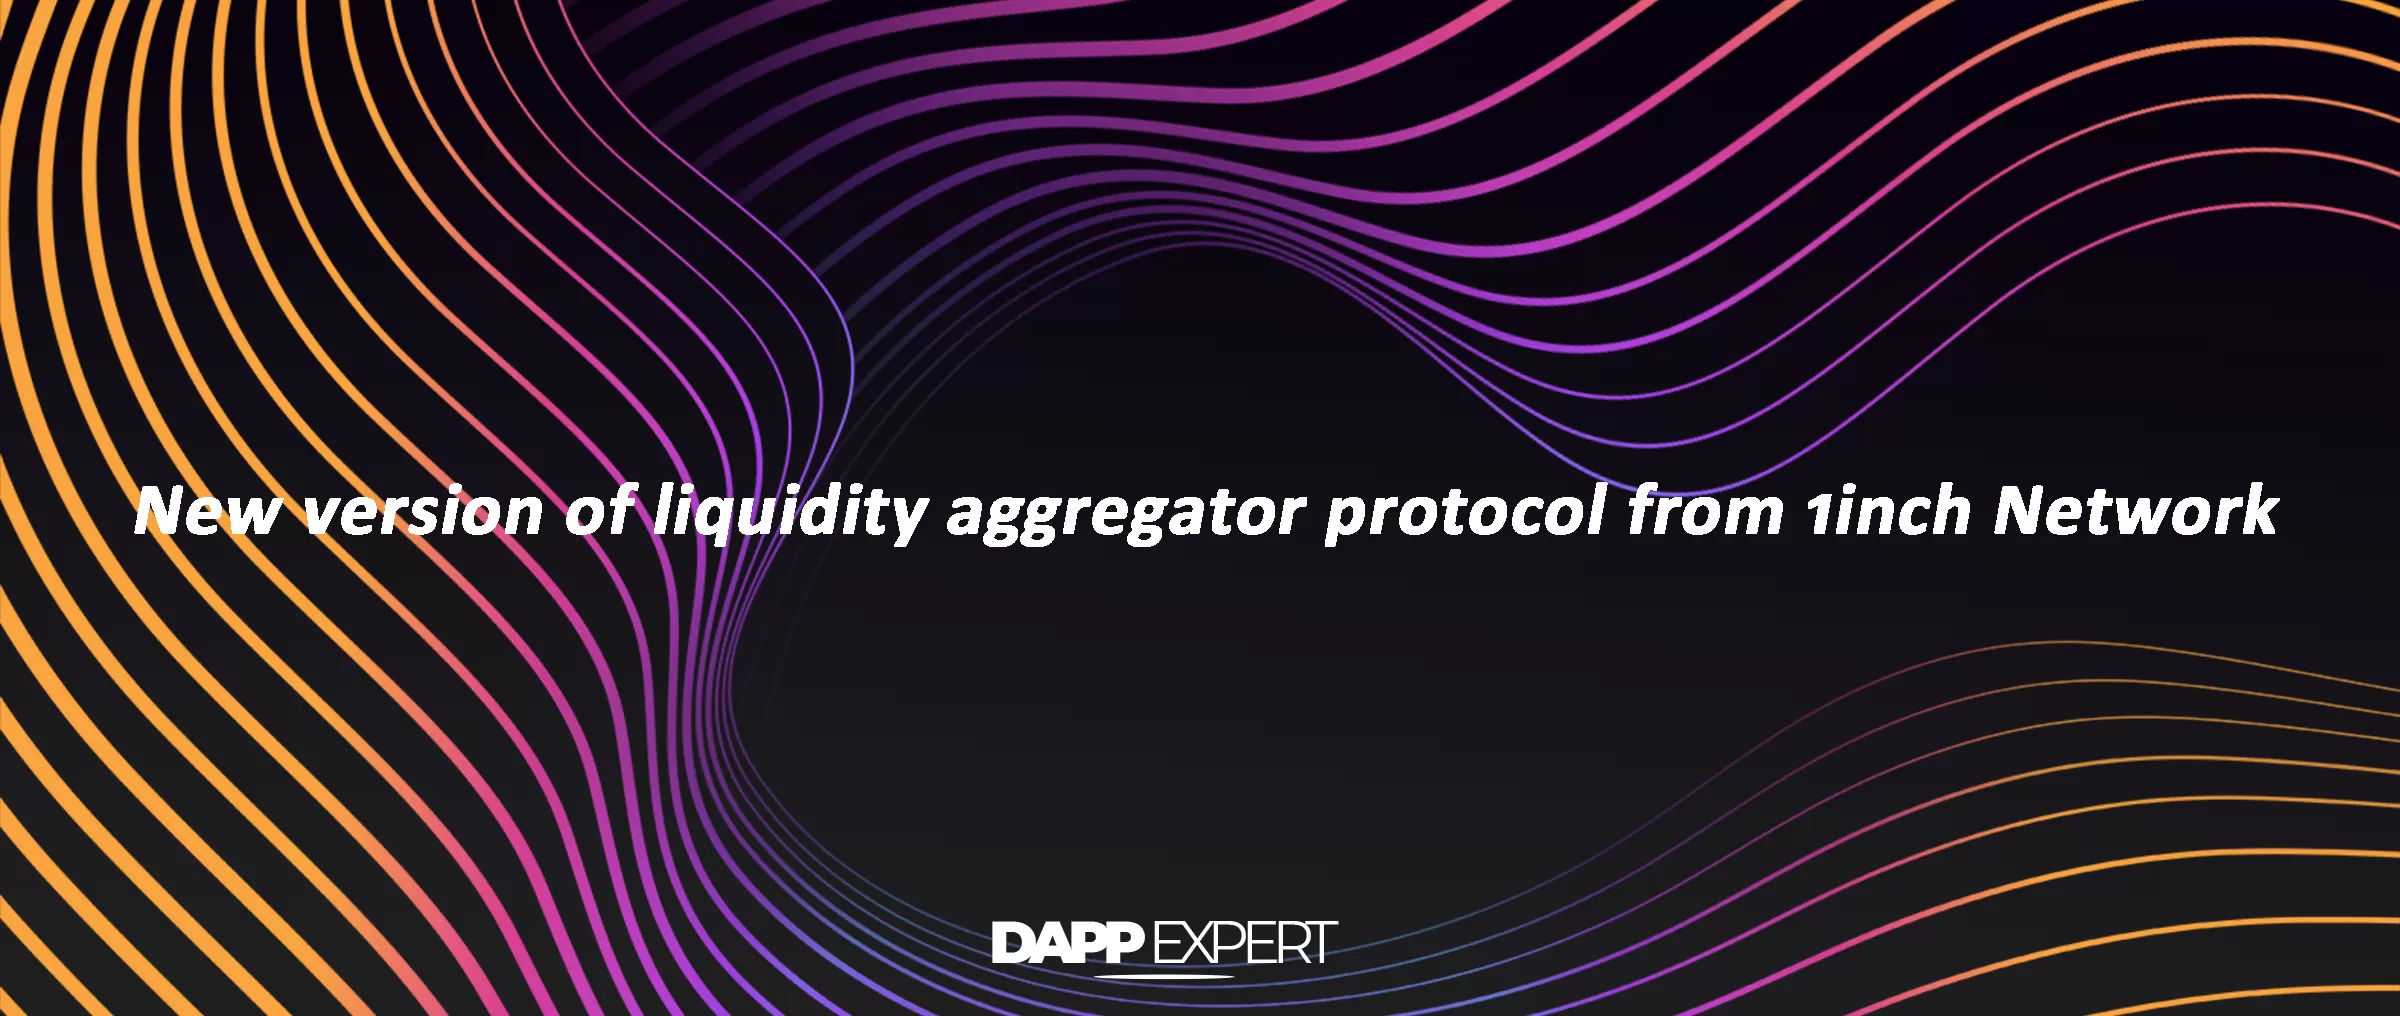 New version of liquidity aggregator protocol from 1inch Network